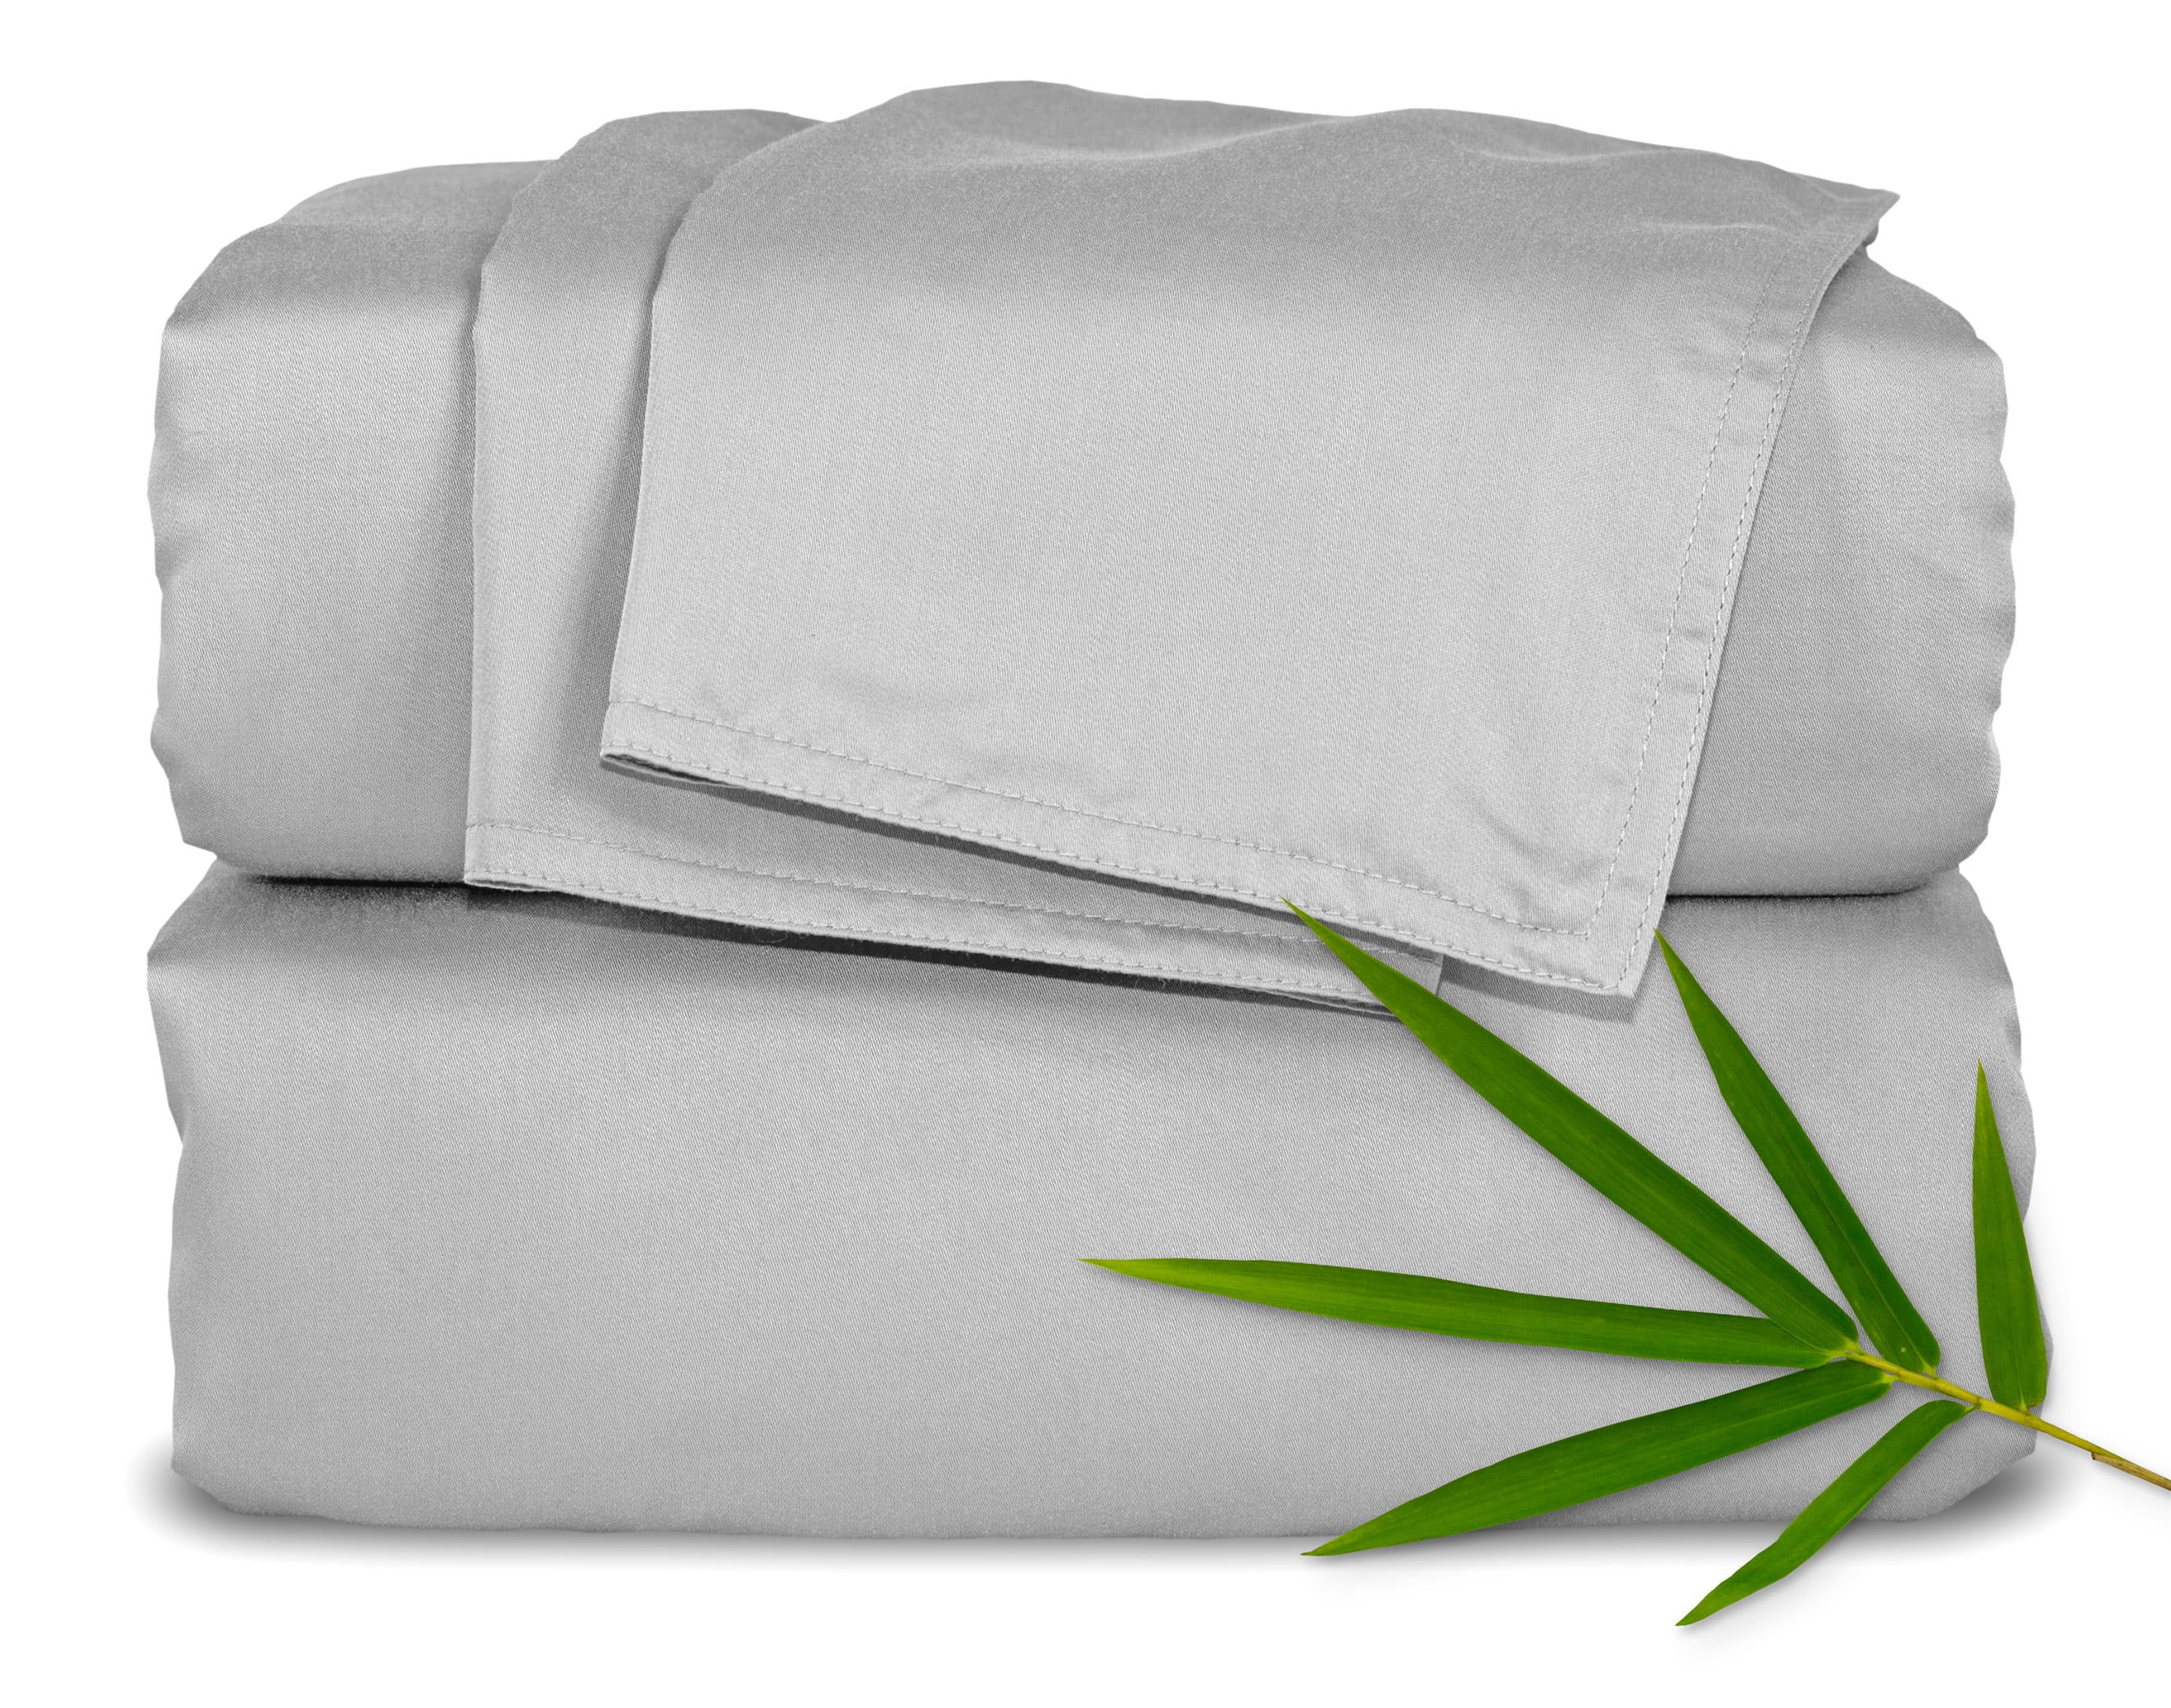 Queen-King-Full-Twin-Split K COMFY BAMBOO SHEETS Luxury SOFT-COOL-Deep Pocket 